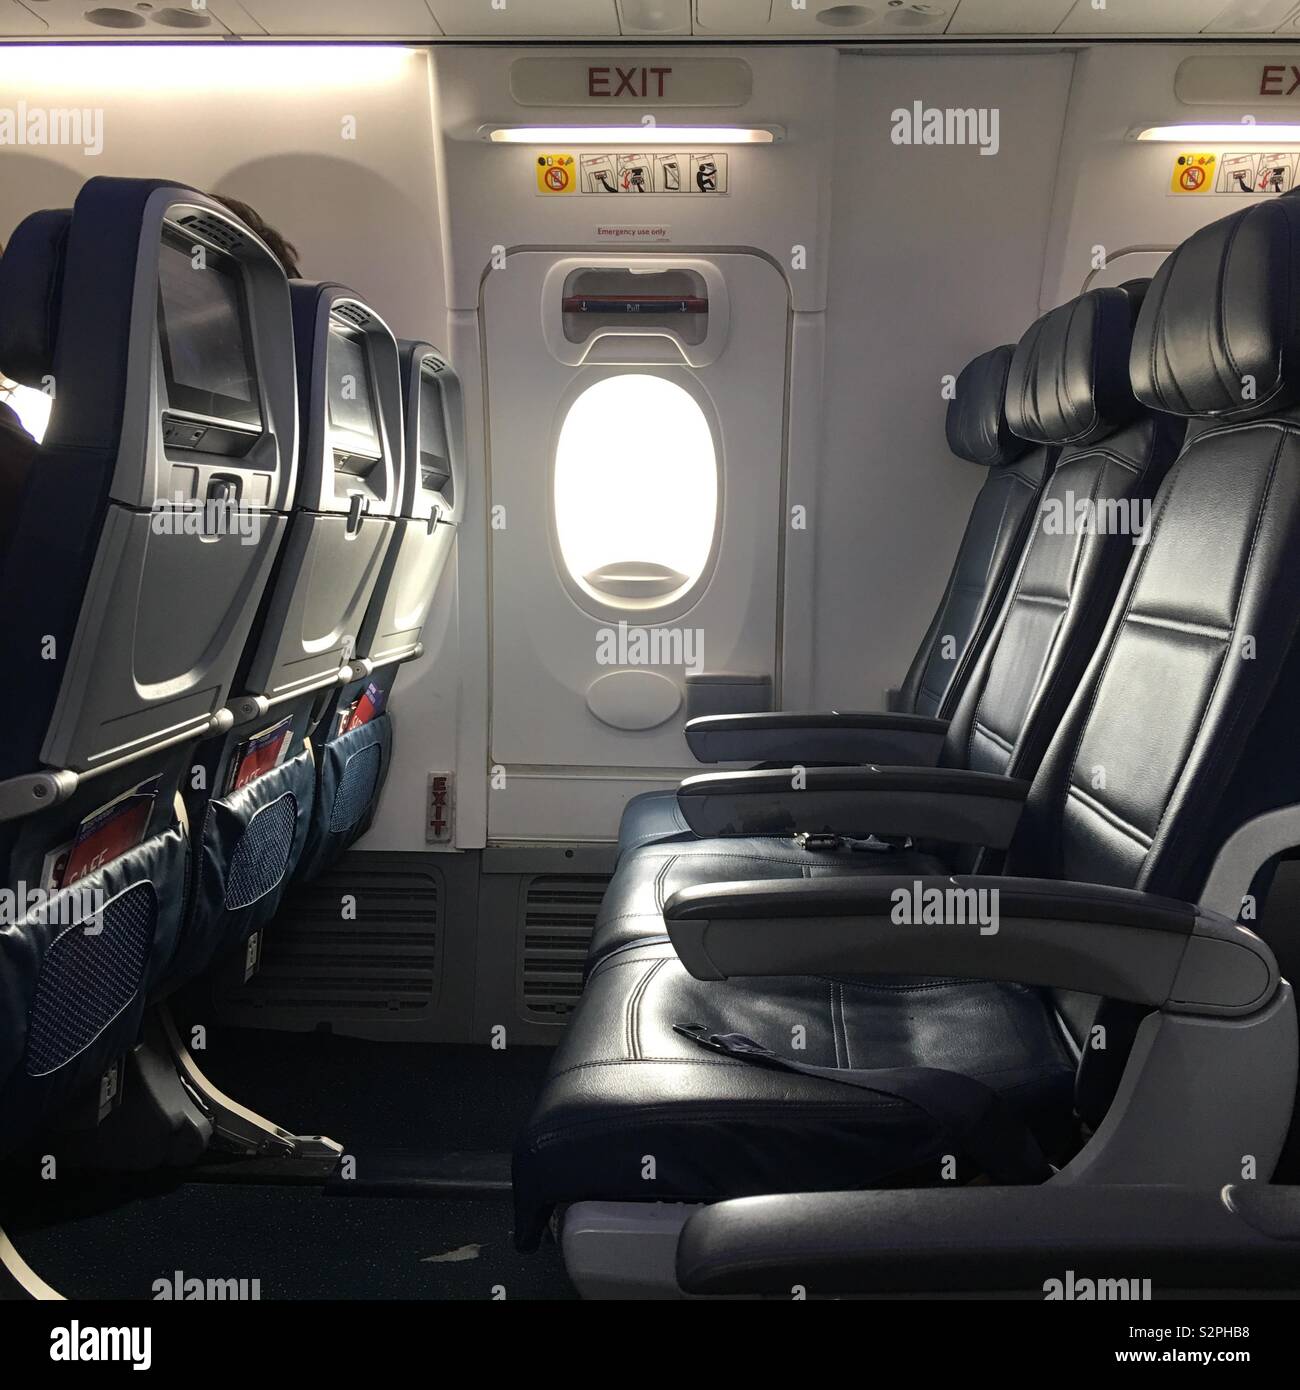 Milwaukee Wi May 2019 View Of Empty Seats In Exit Row On